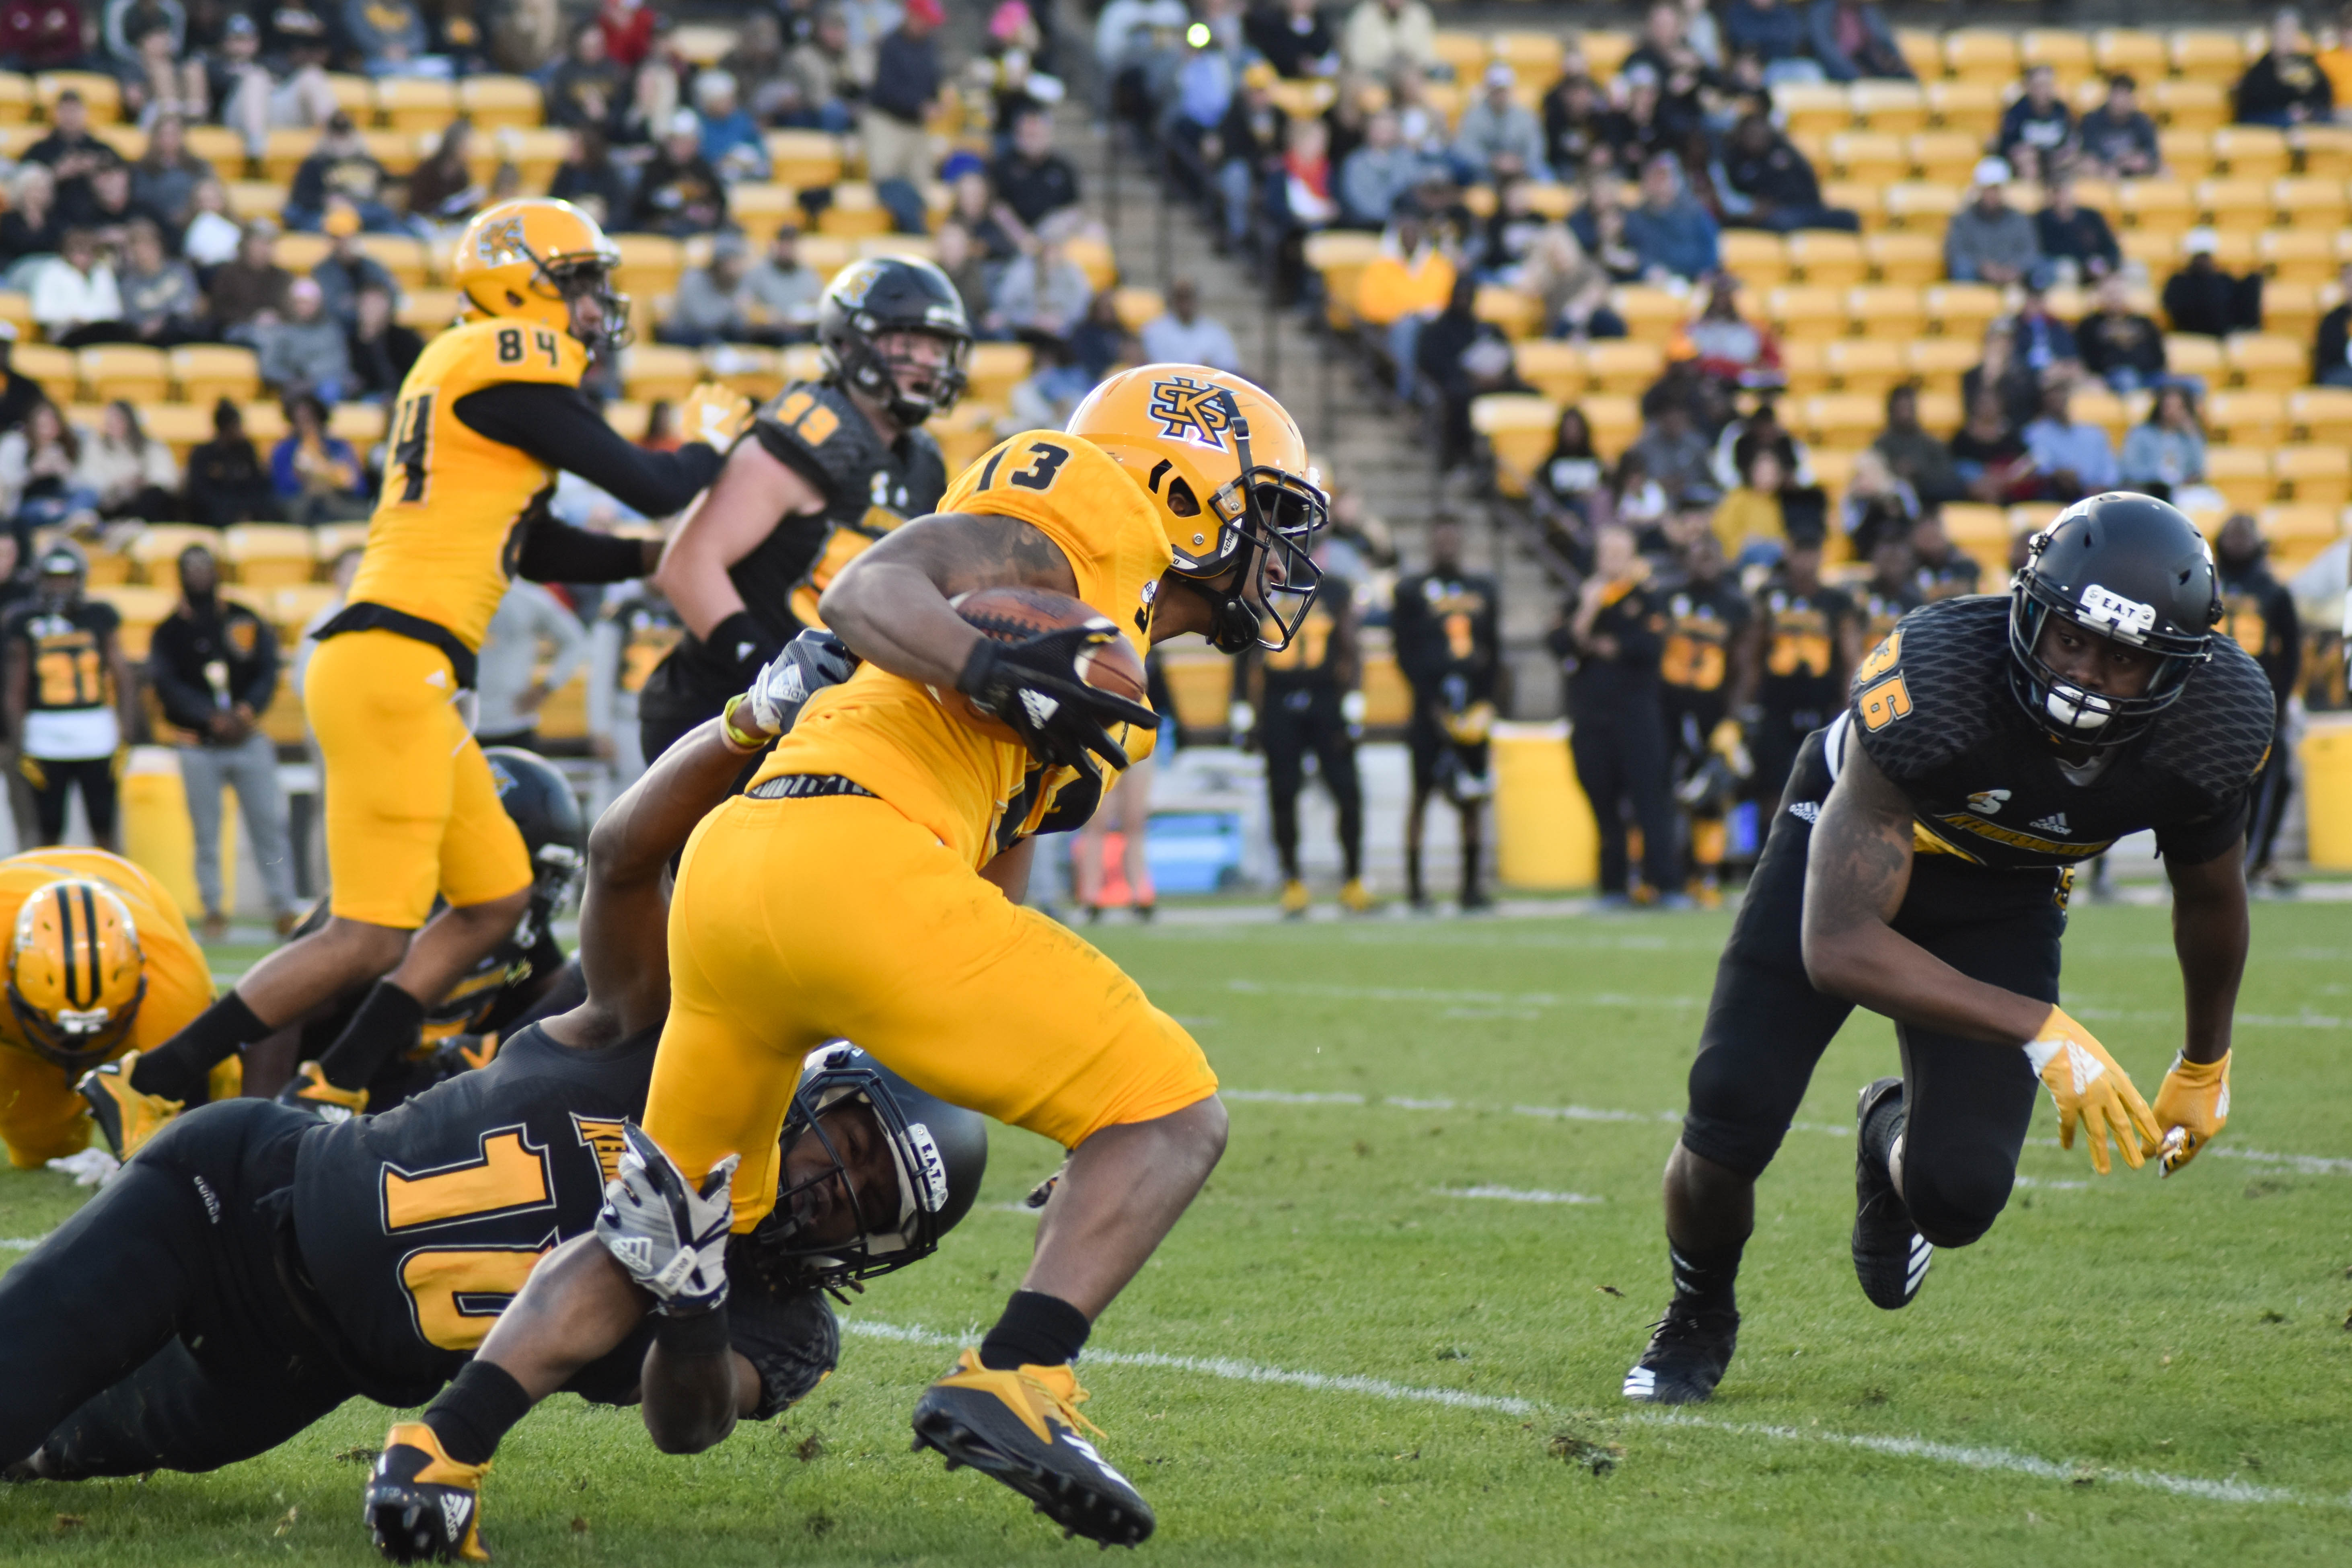 Defense victorious over offense during KSU’s spring football game